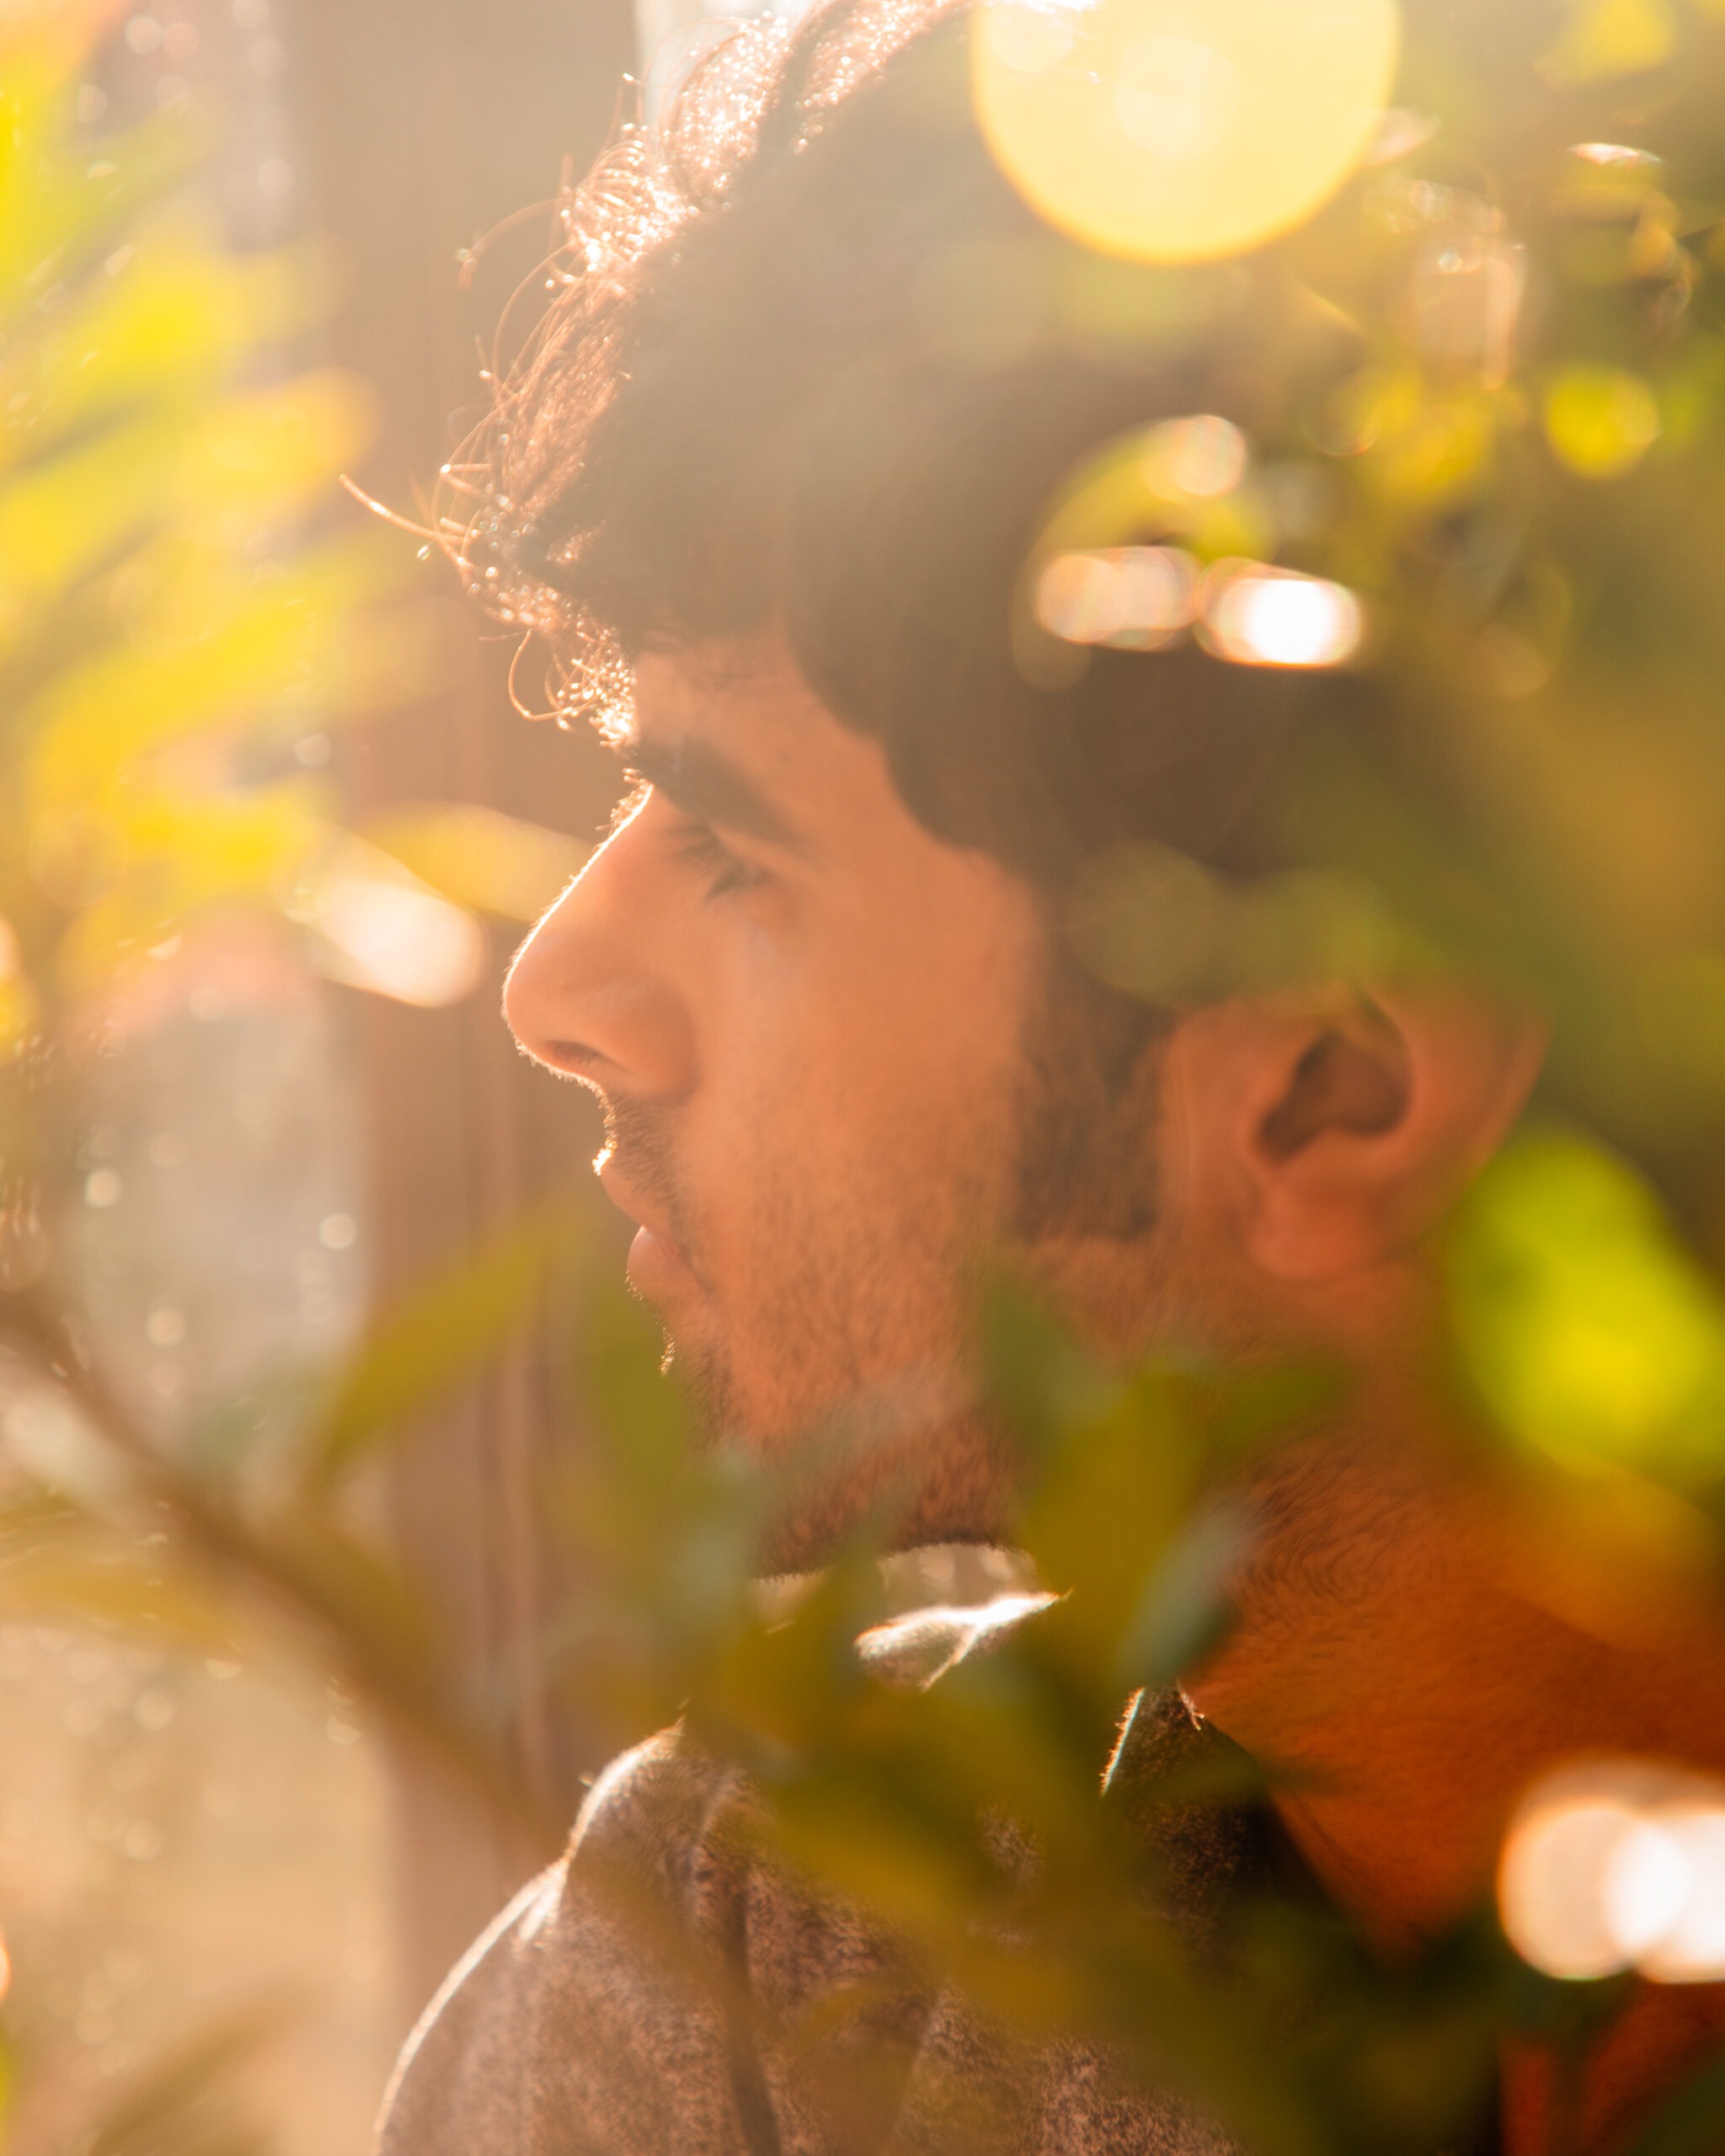 The photo features a man in profile with sunlight filtering through the leaves, casting a warm glow and creating a bokeh effect around him. The man has brown hair, and the sun highlights the contours of his face. The lush greenery partially obscures him, giving the image a natural, serene feel